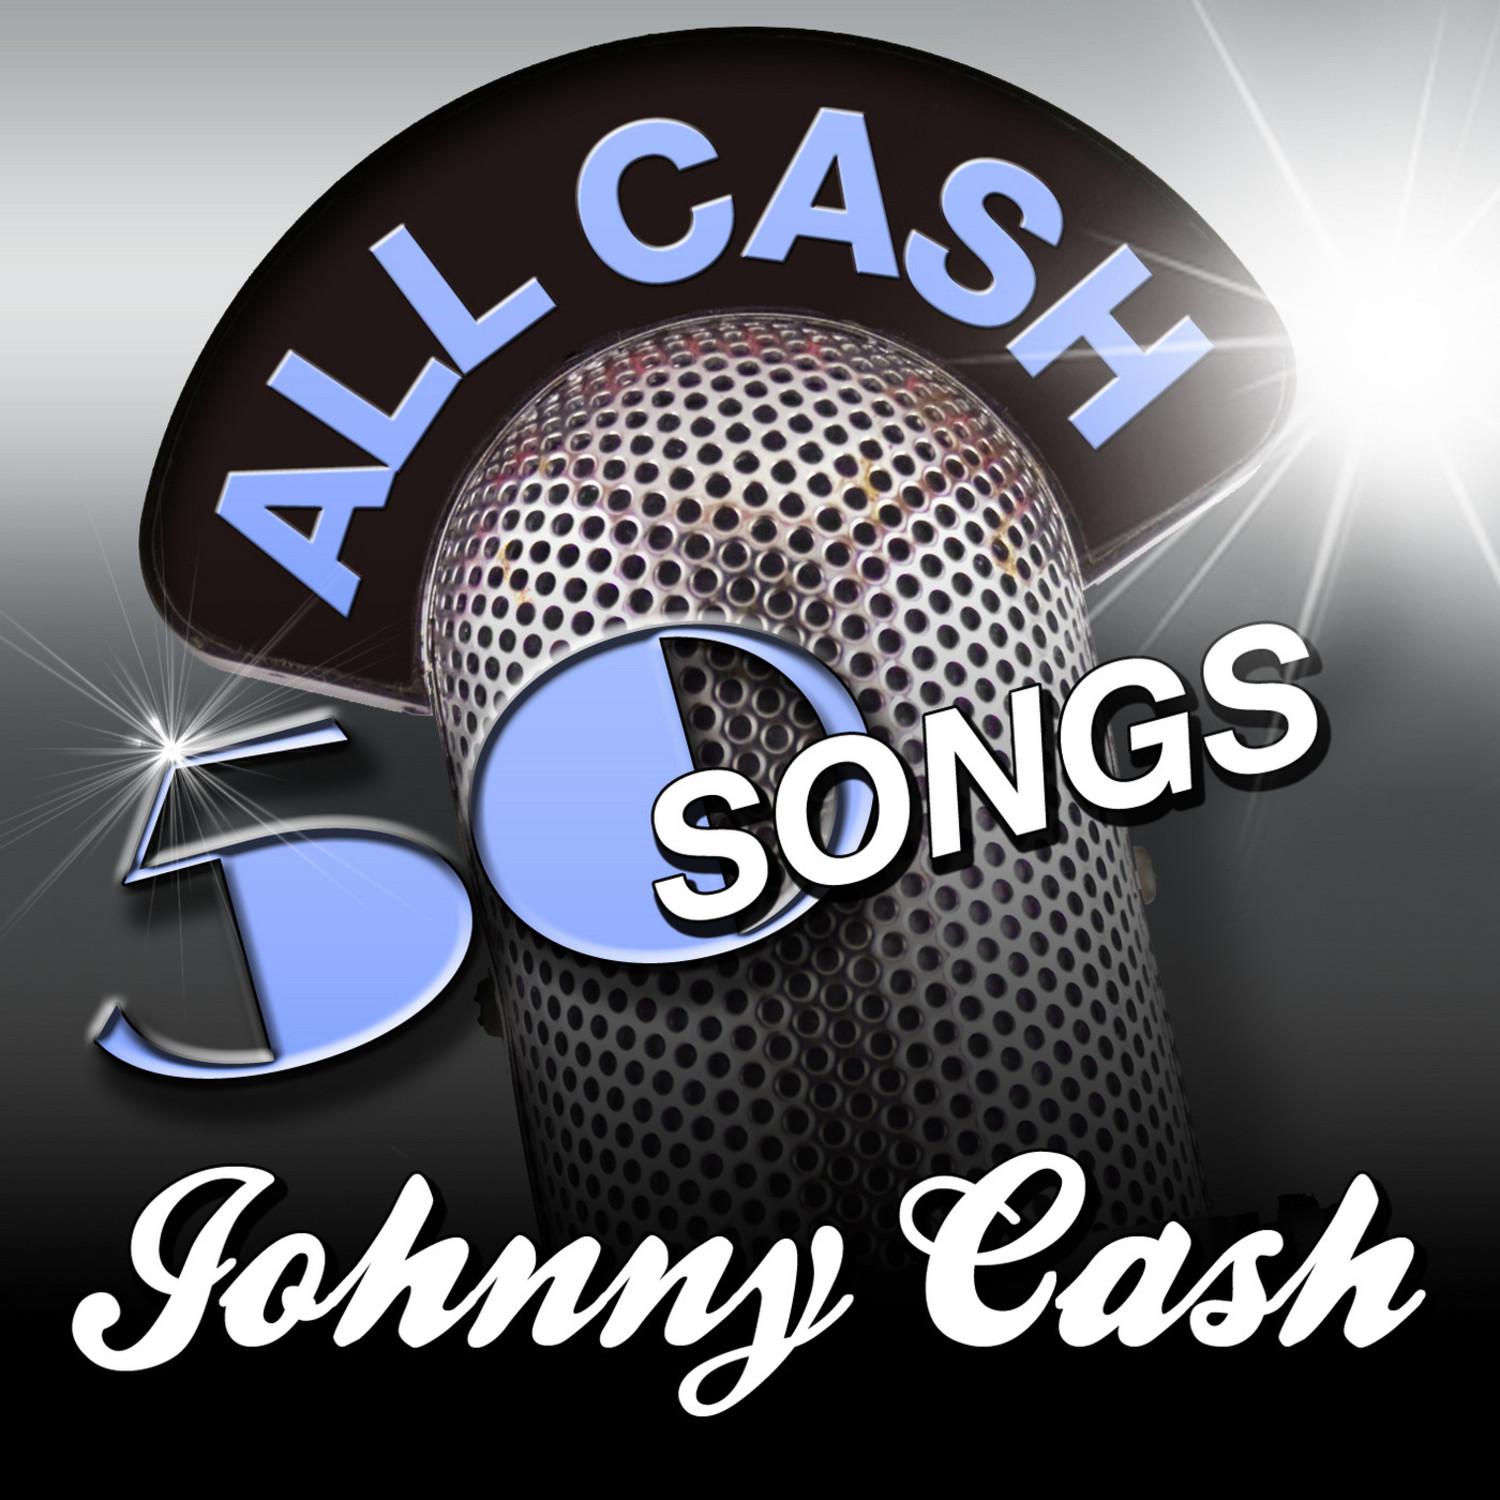 All Cash - 50 Songs